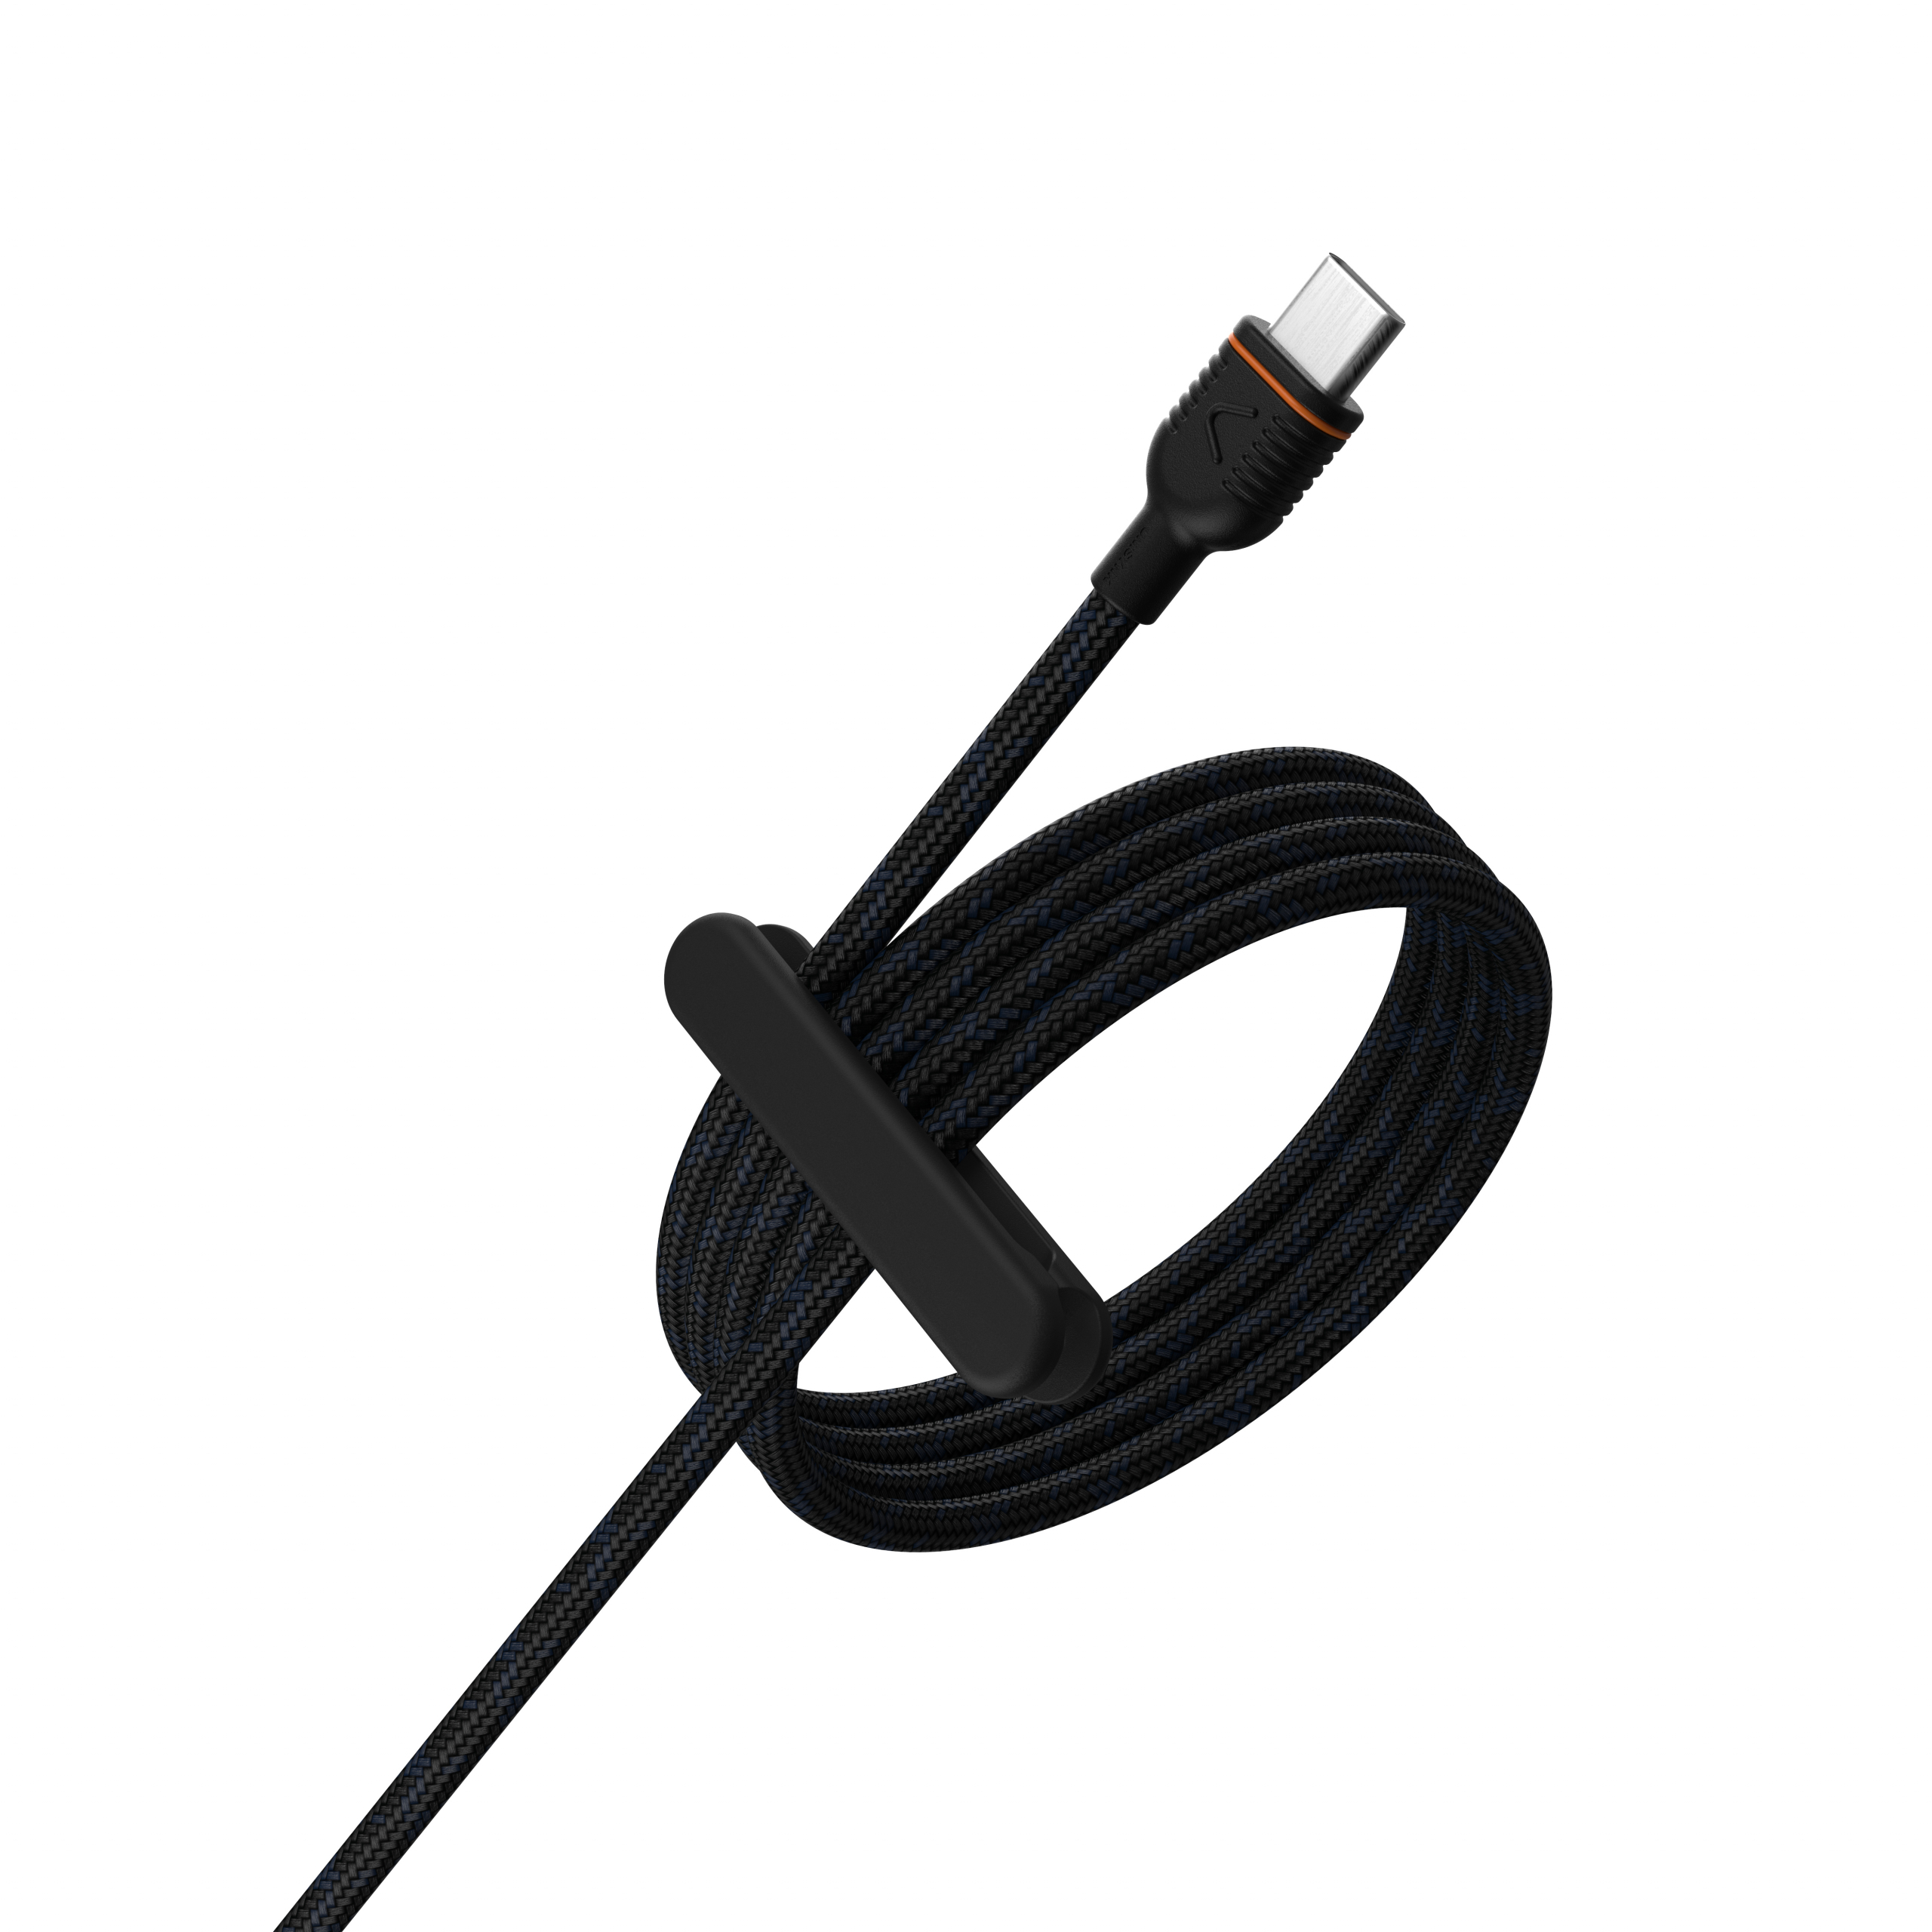 USB-C to USB-C Cable - UNISYNK